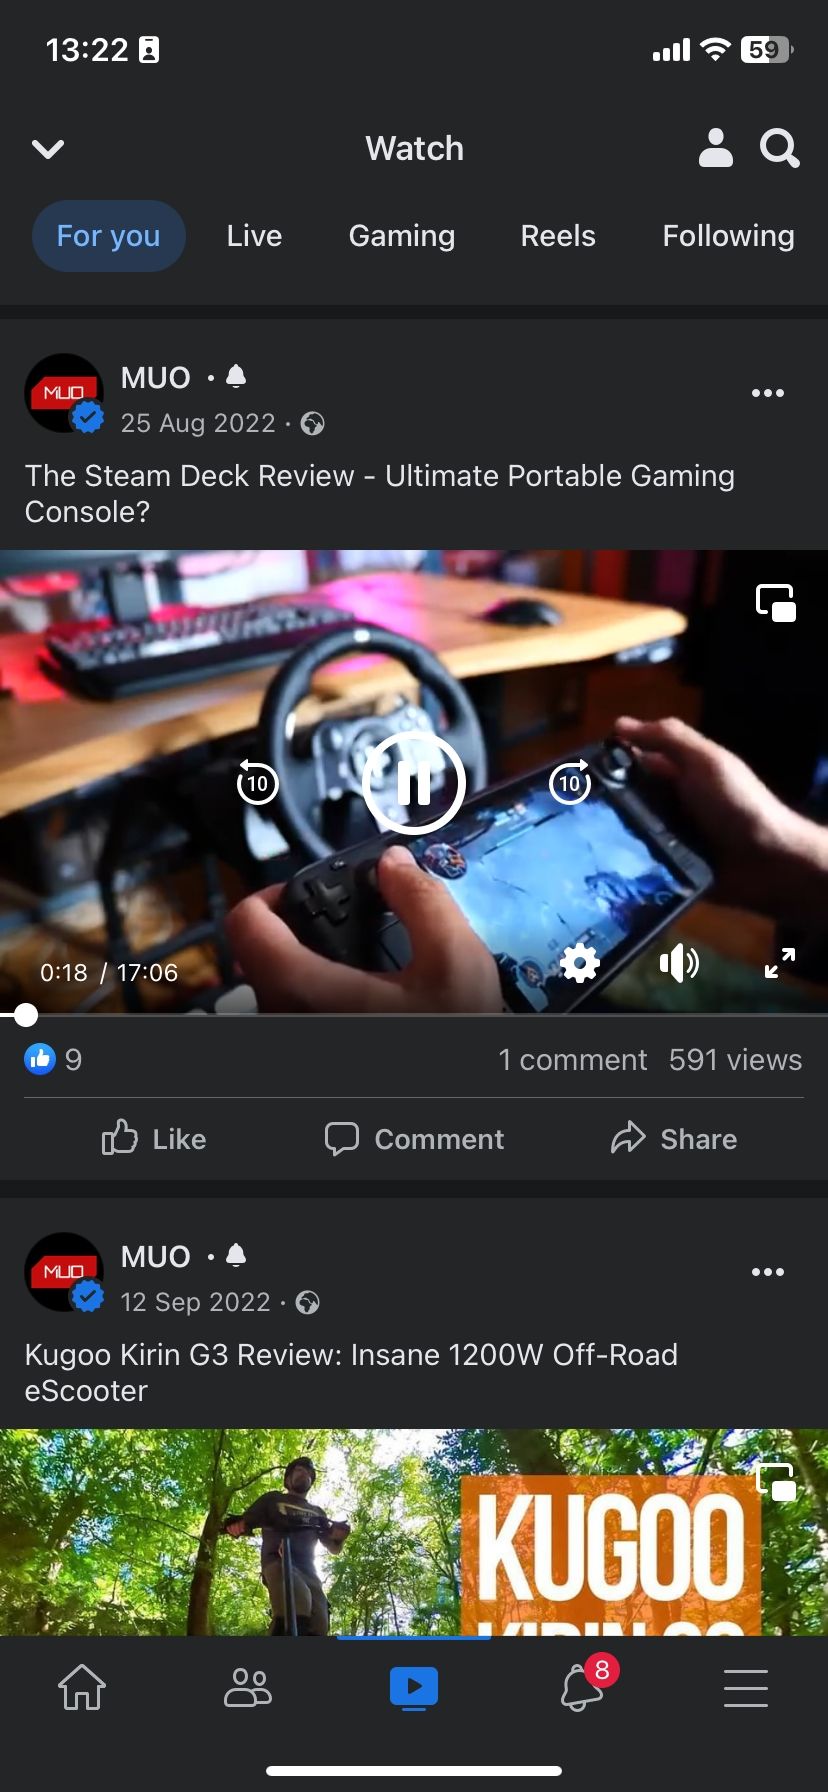 Playing a video on Facebook